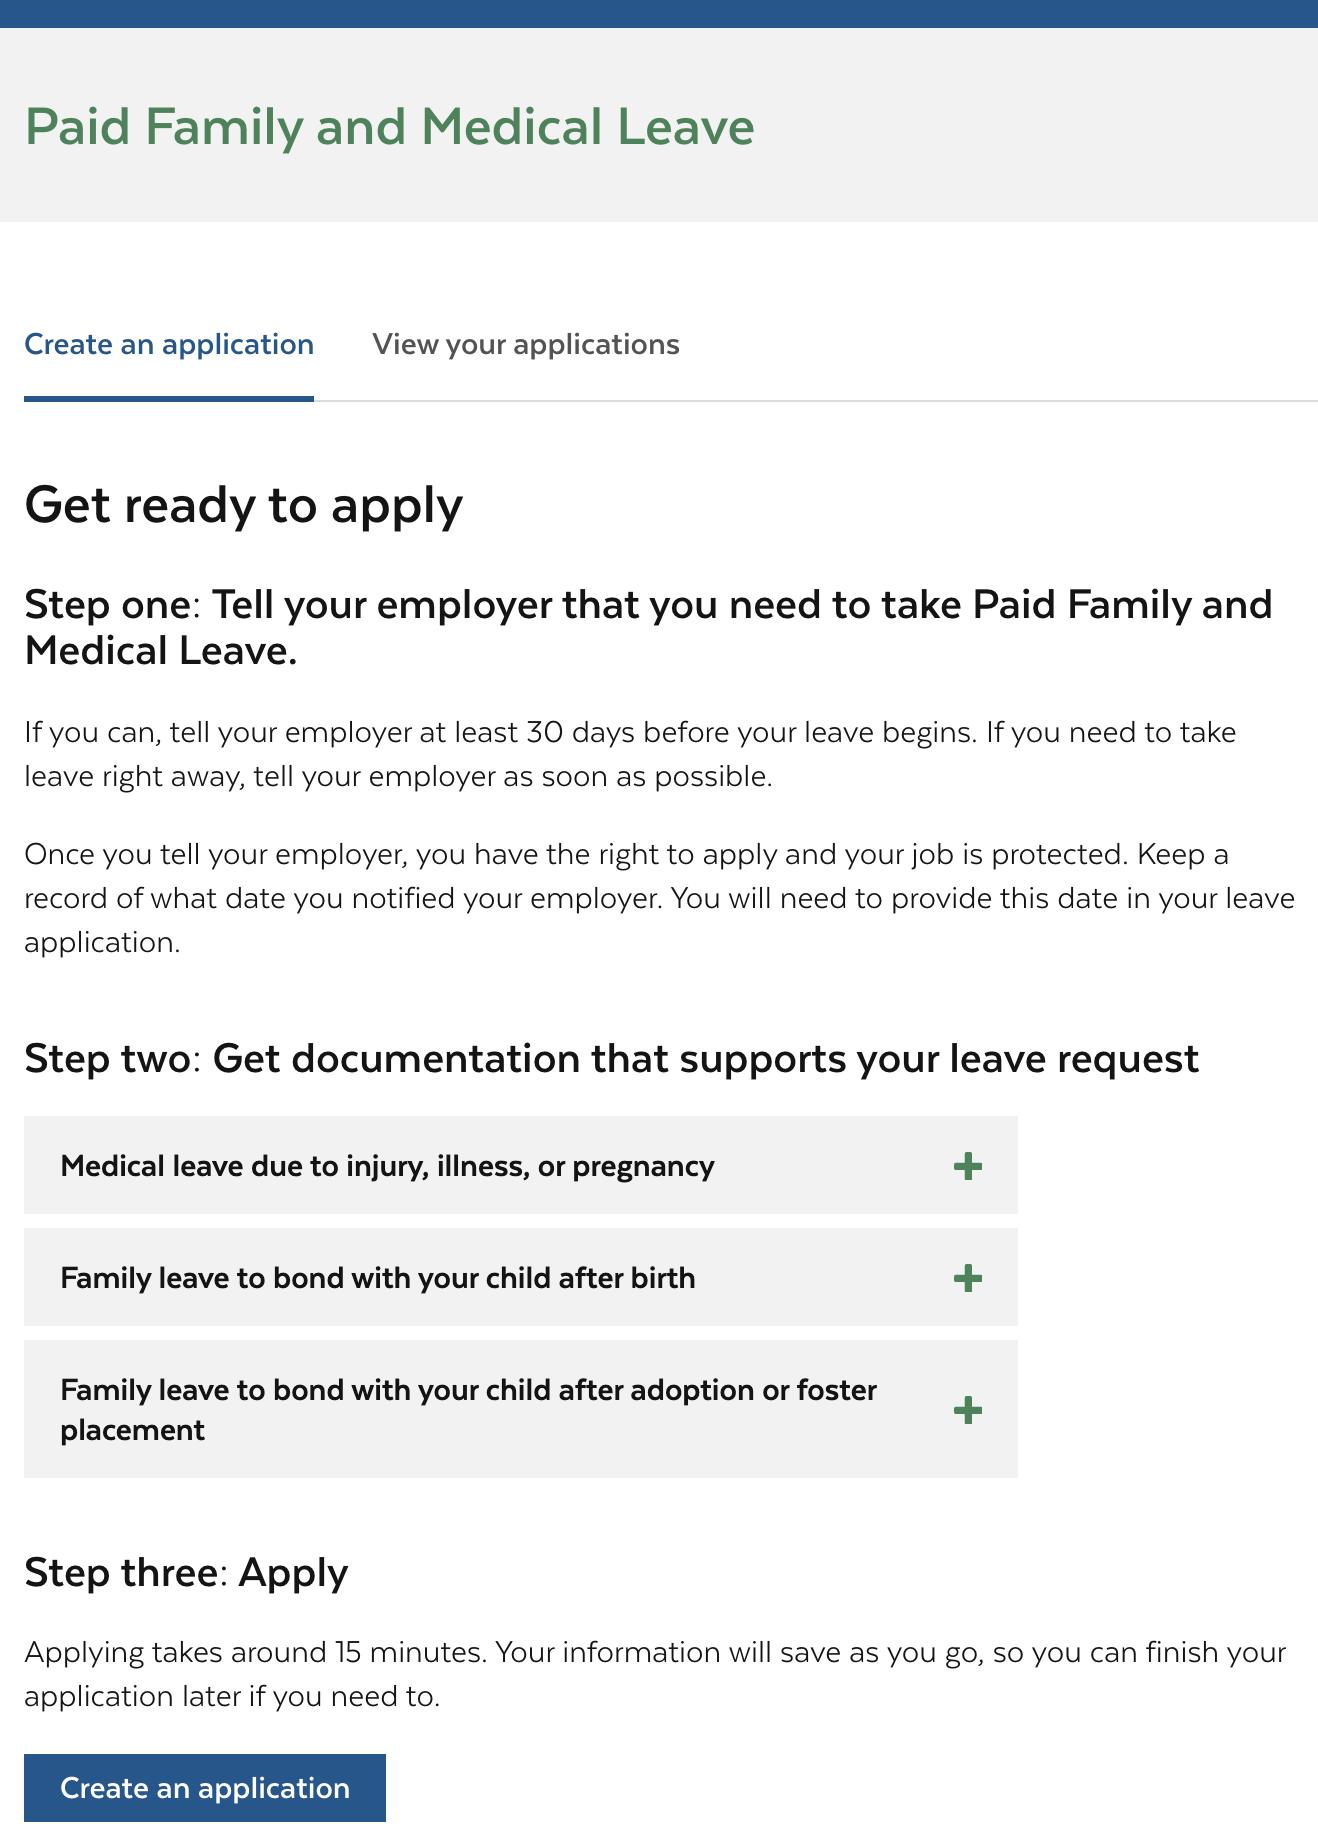 A screenshot showing big picture, step by step instructions for how to apply for PFML as well as an option to view current application.